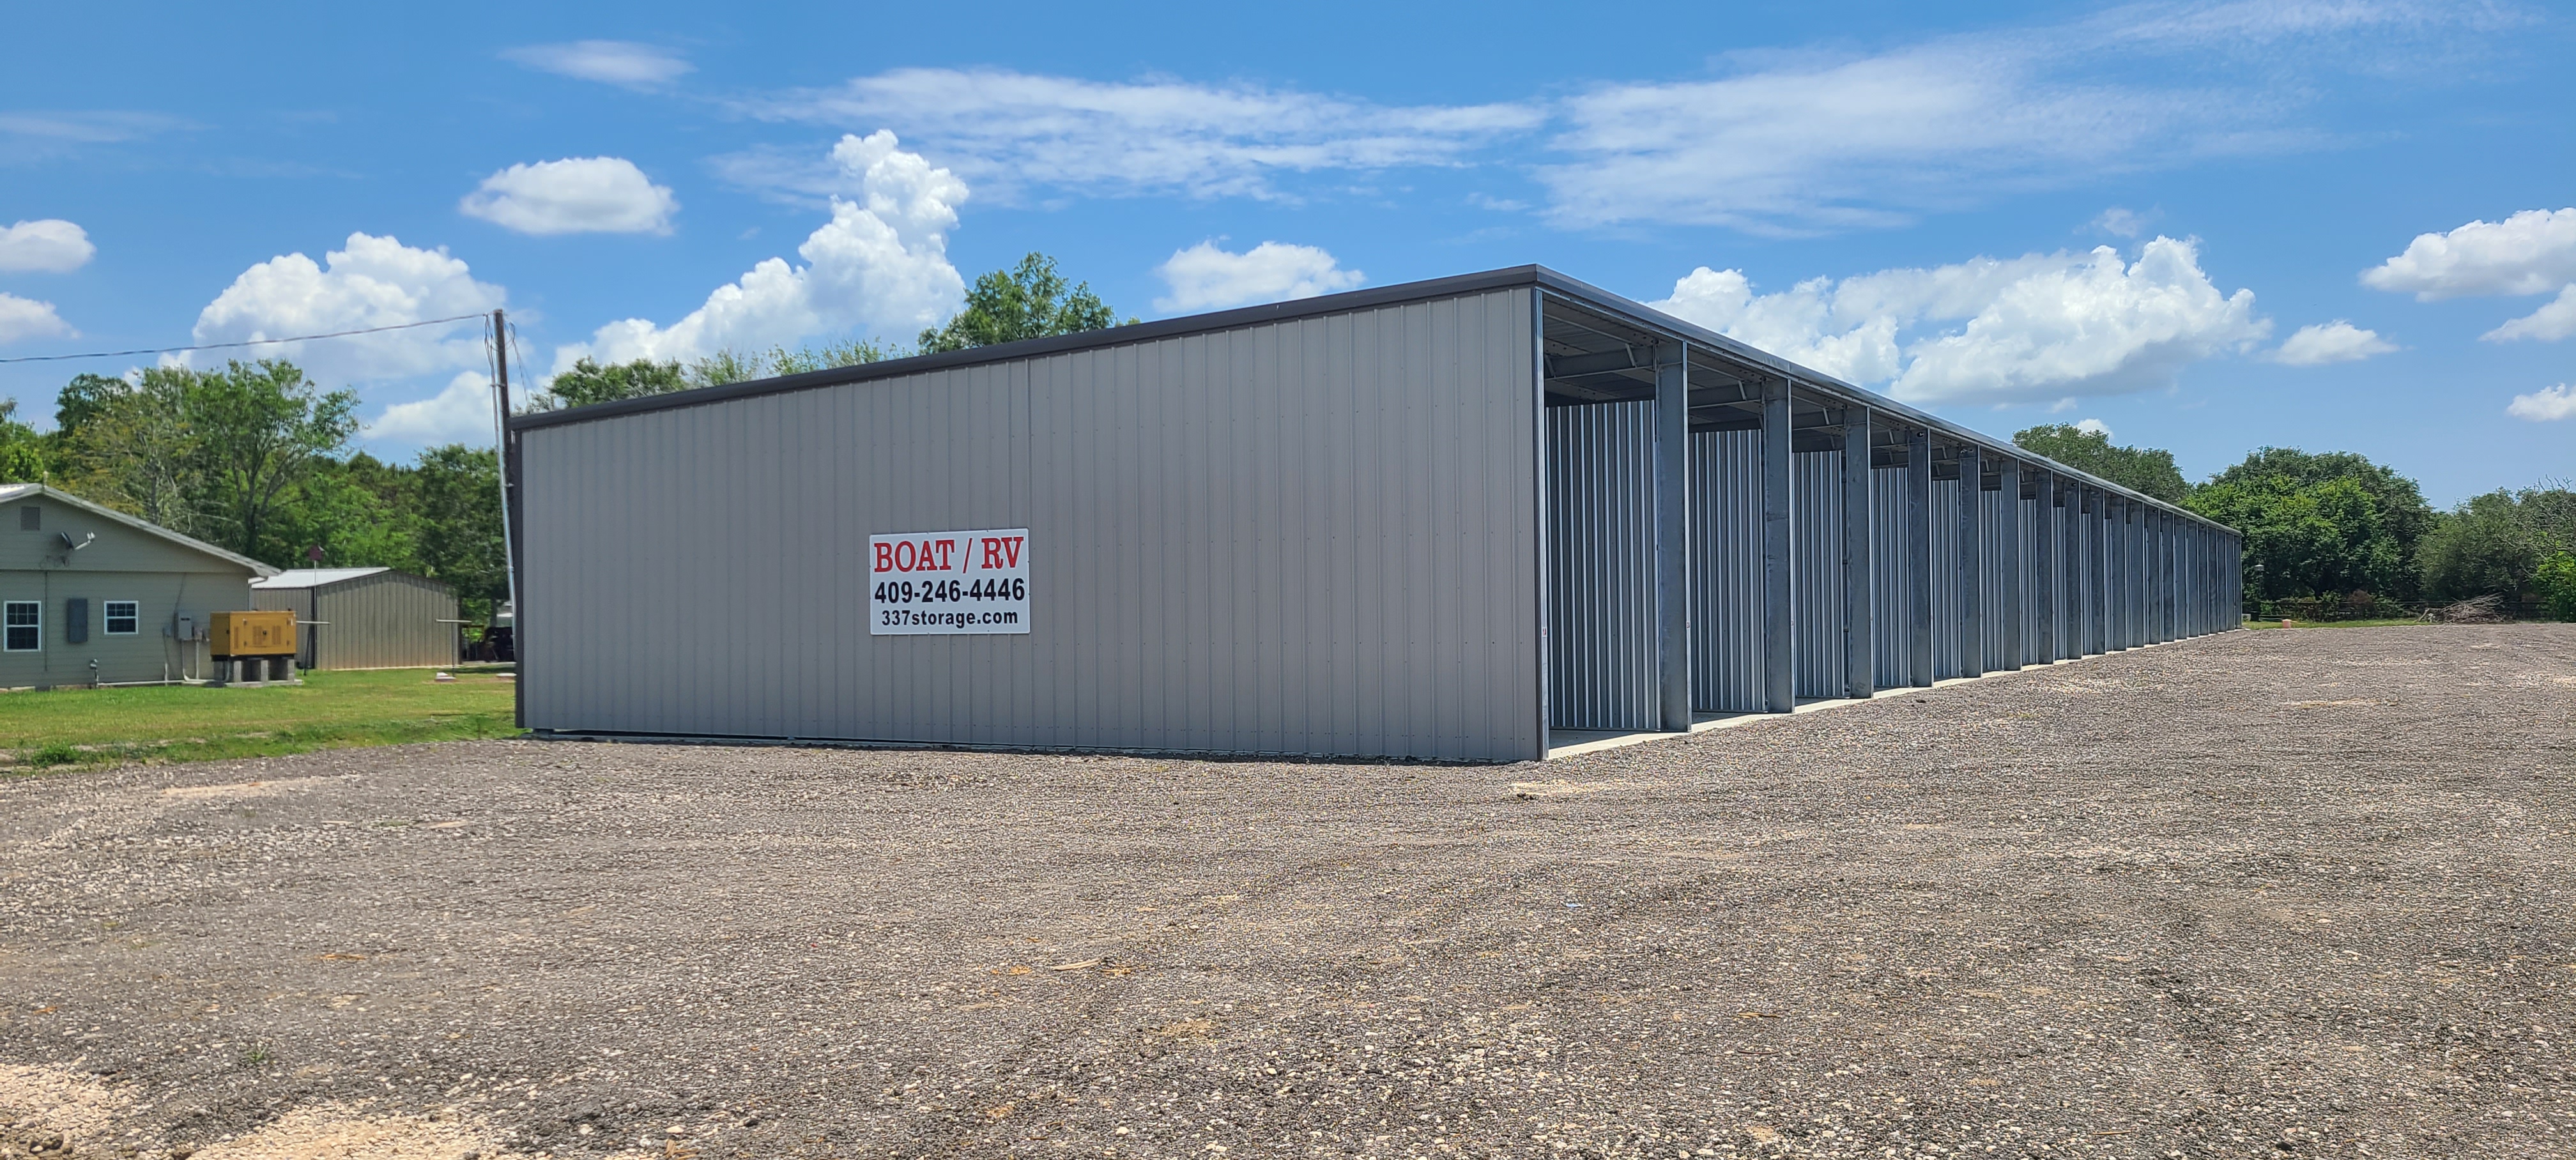 Drive Up Access Storage Units in Hamshire, TX 